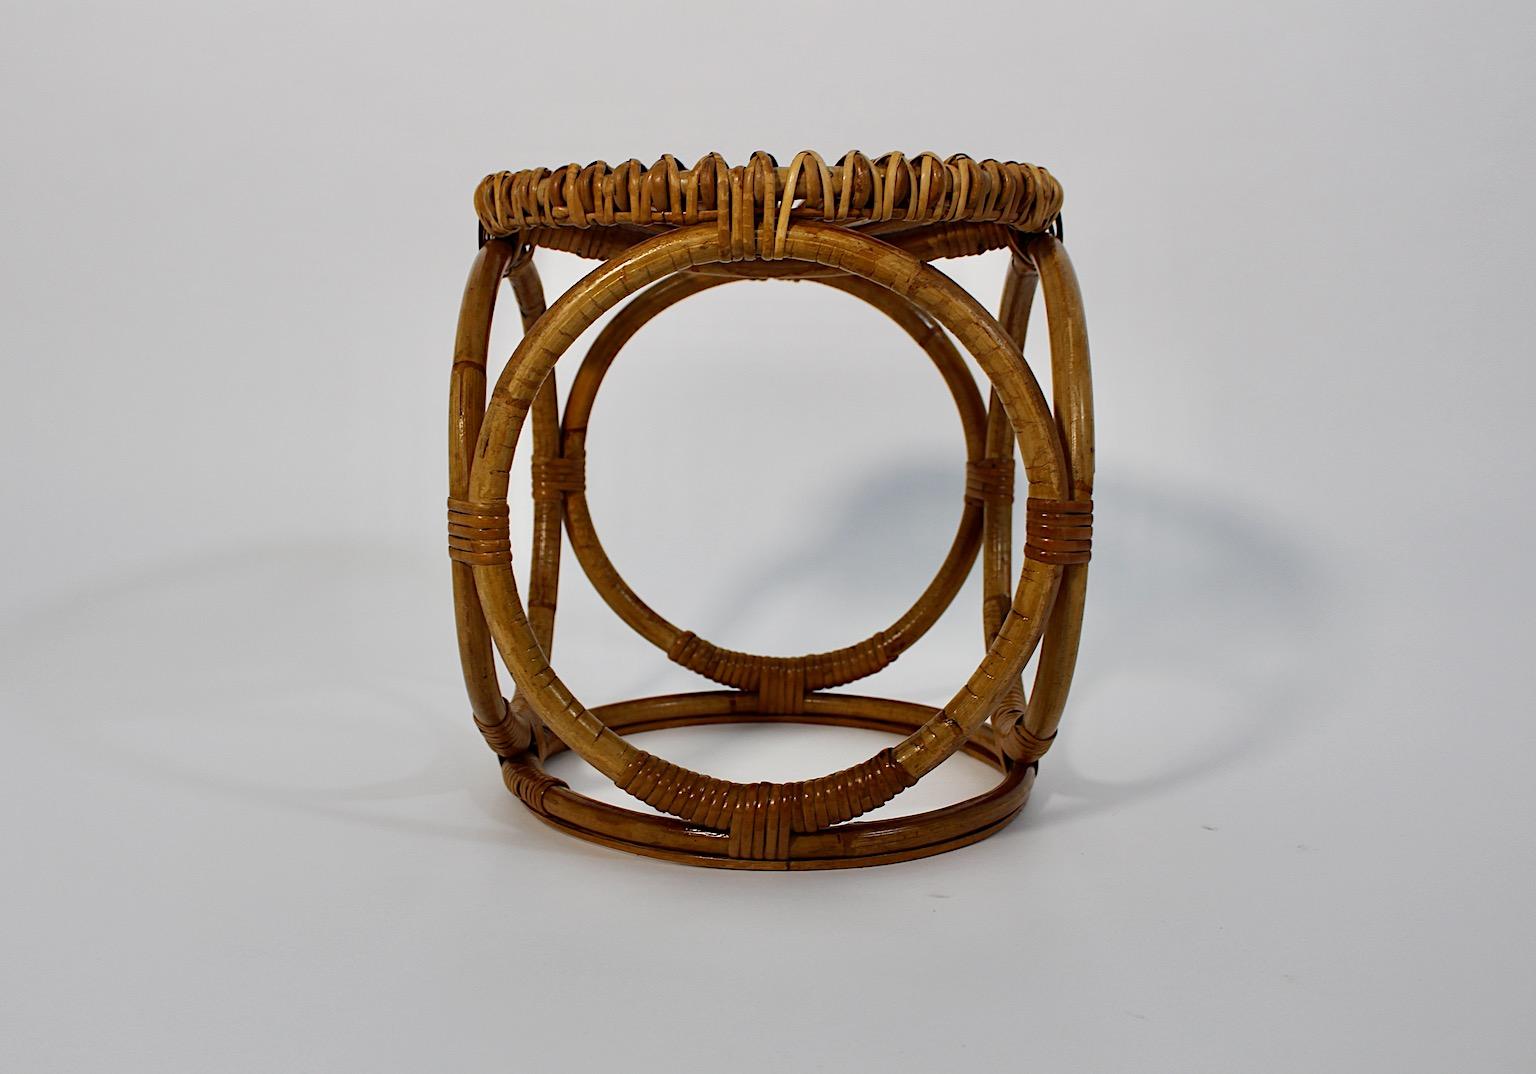 Mid Century Modern Organic vintage stool from rattan circular like with woven seat 1950s Italy.
A charming stool from beautiful woven rattan in warm brown color.
The right stool to add a stunning touch of Organic feel into your environment and